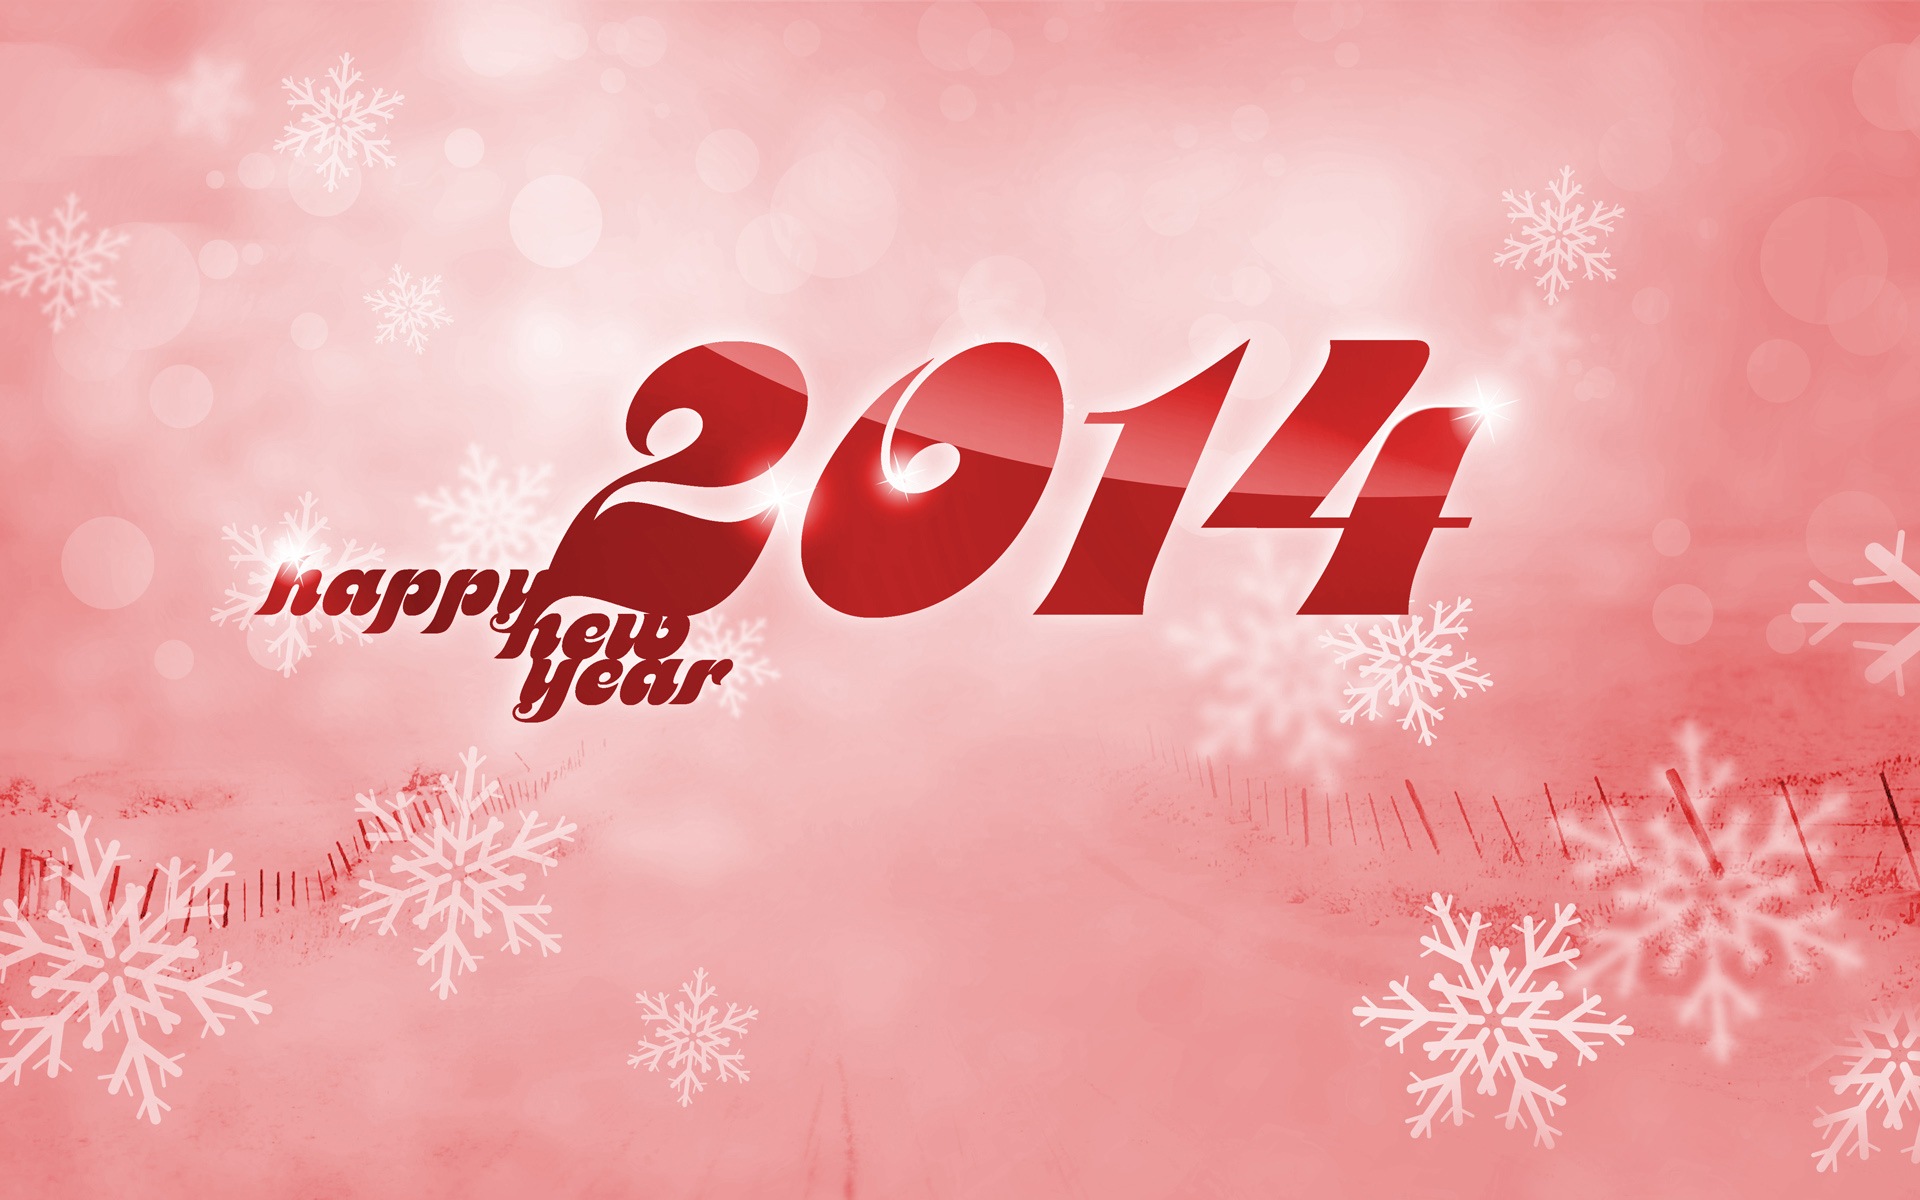 2014 New Year Theme HD Wallpapers (1) #12 - 1920x1200